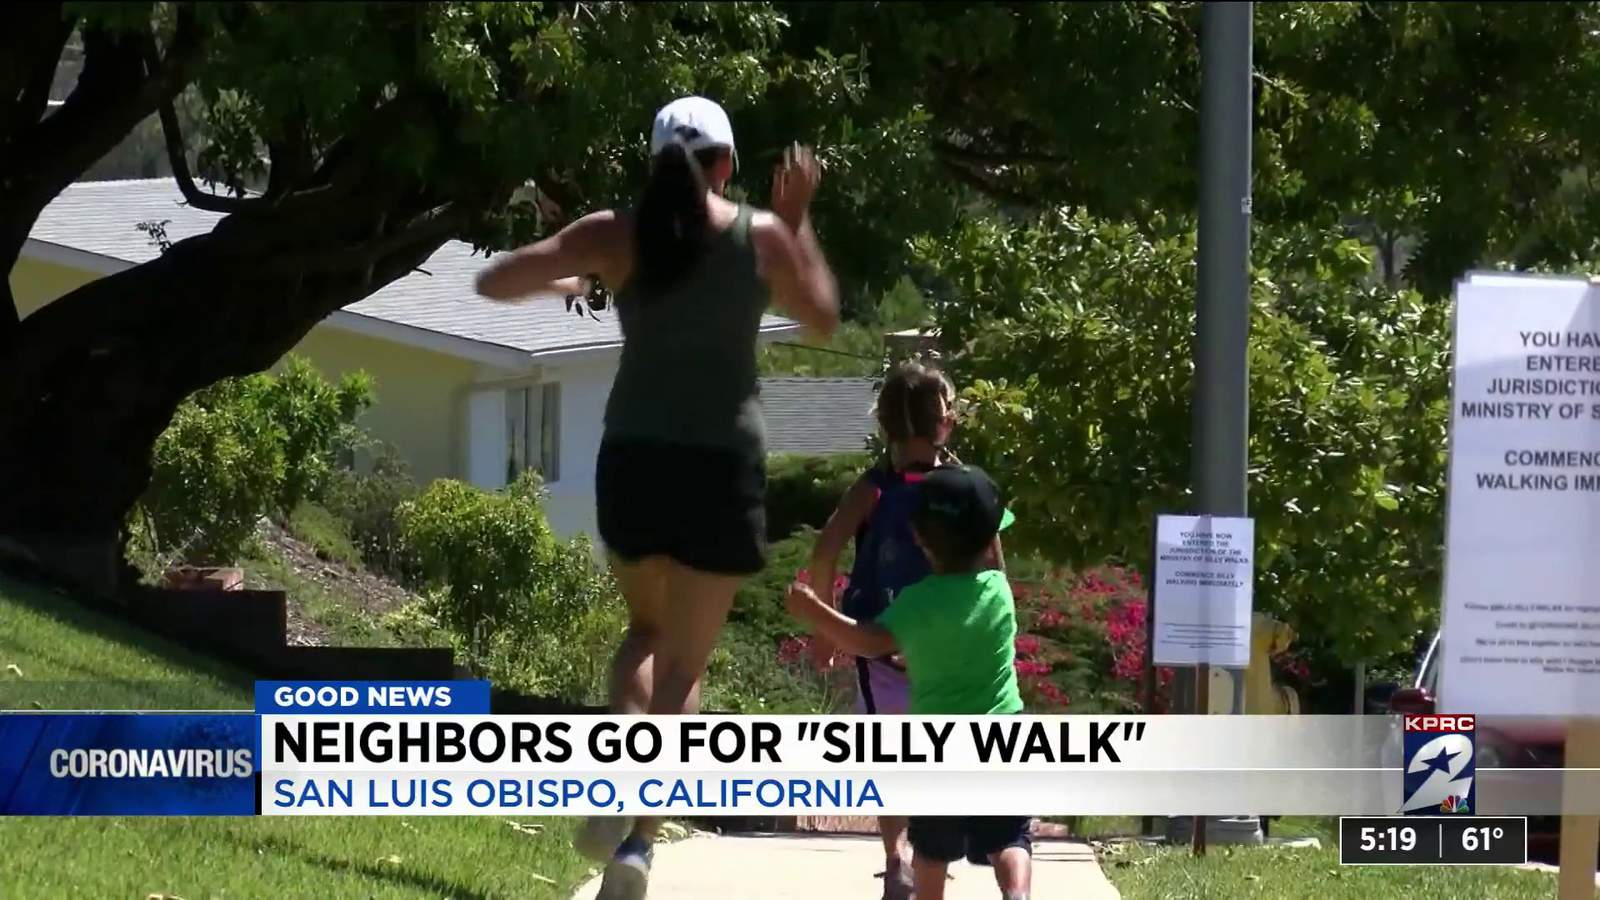 One Good Thing: Residents go for ‘silly walks’ in California neighborhood